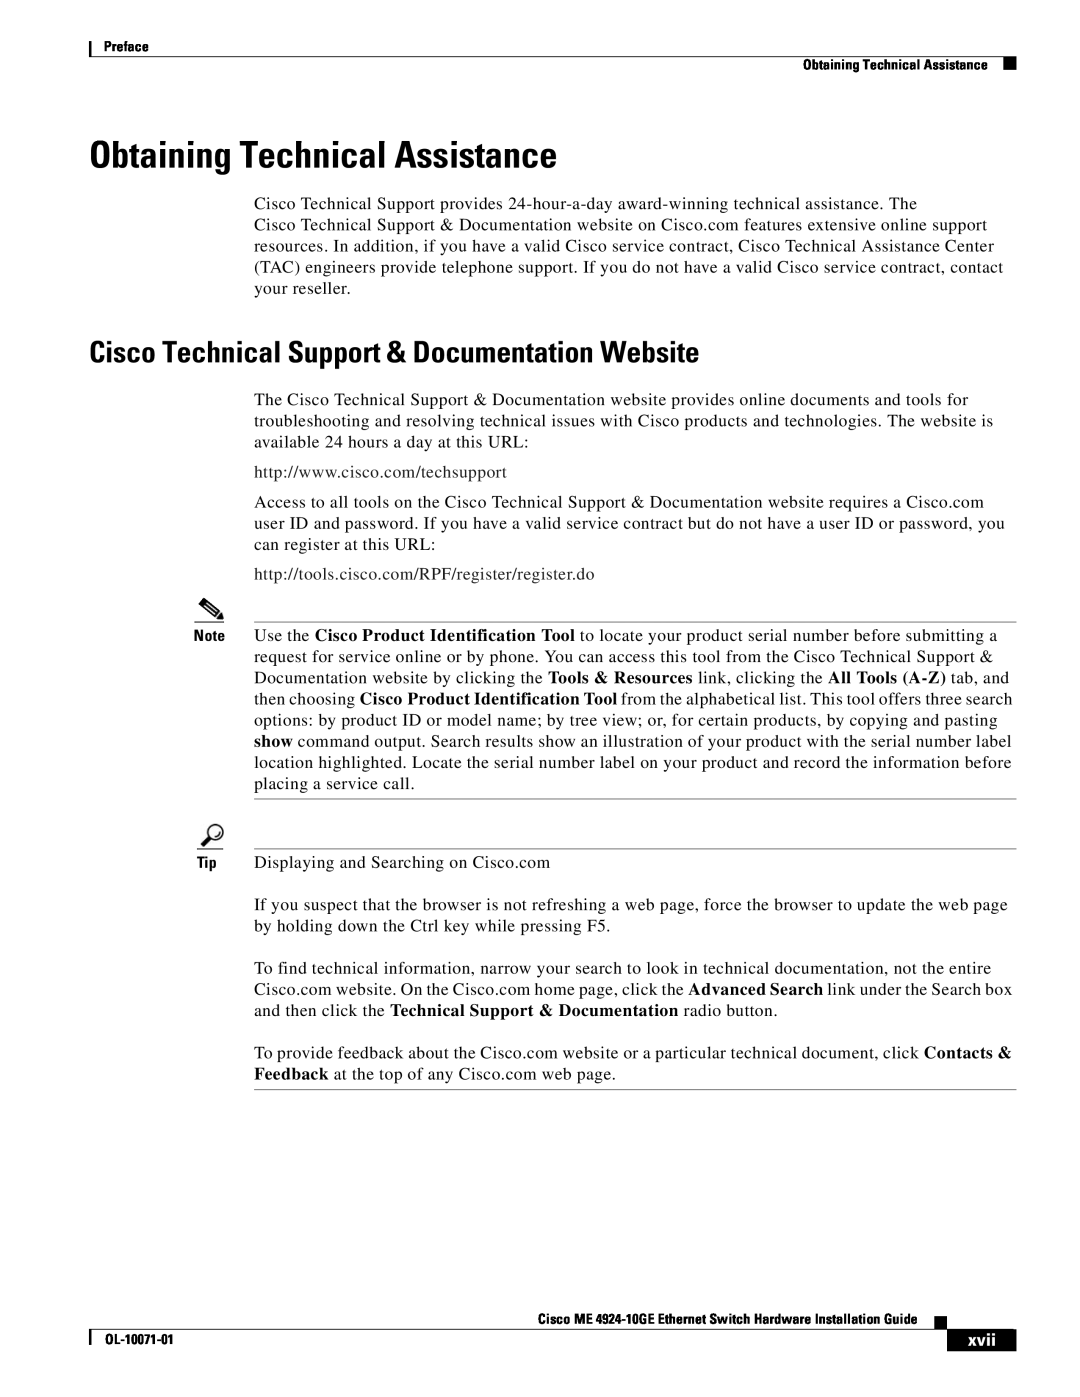 Cisco Systems ME 4924-10GE manual Obtaining Technical Assistance, Cisco Technical Support & Documentation Website, xvii 